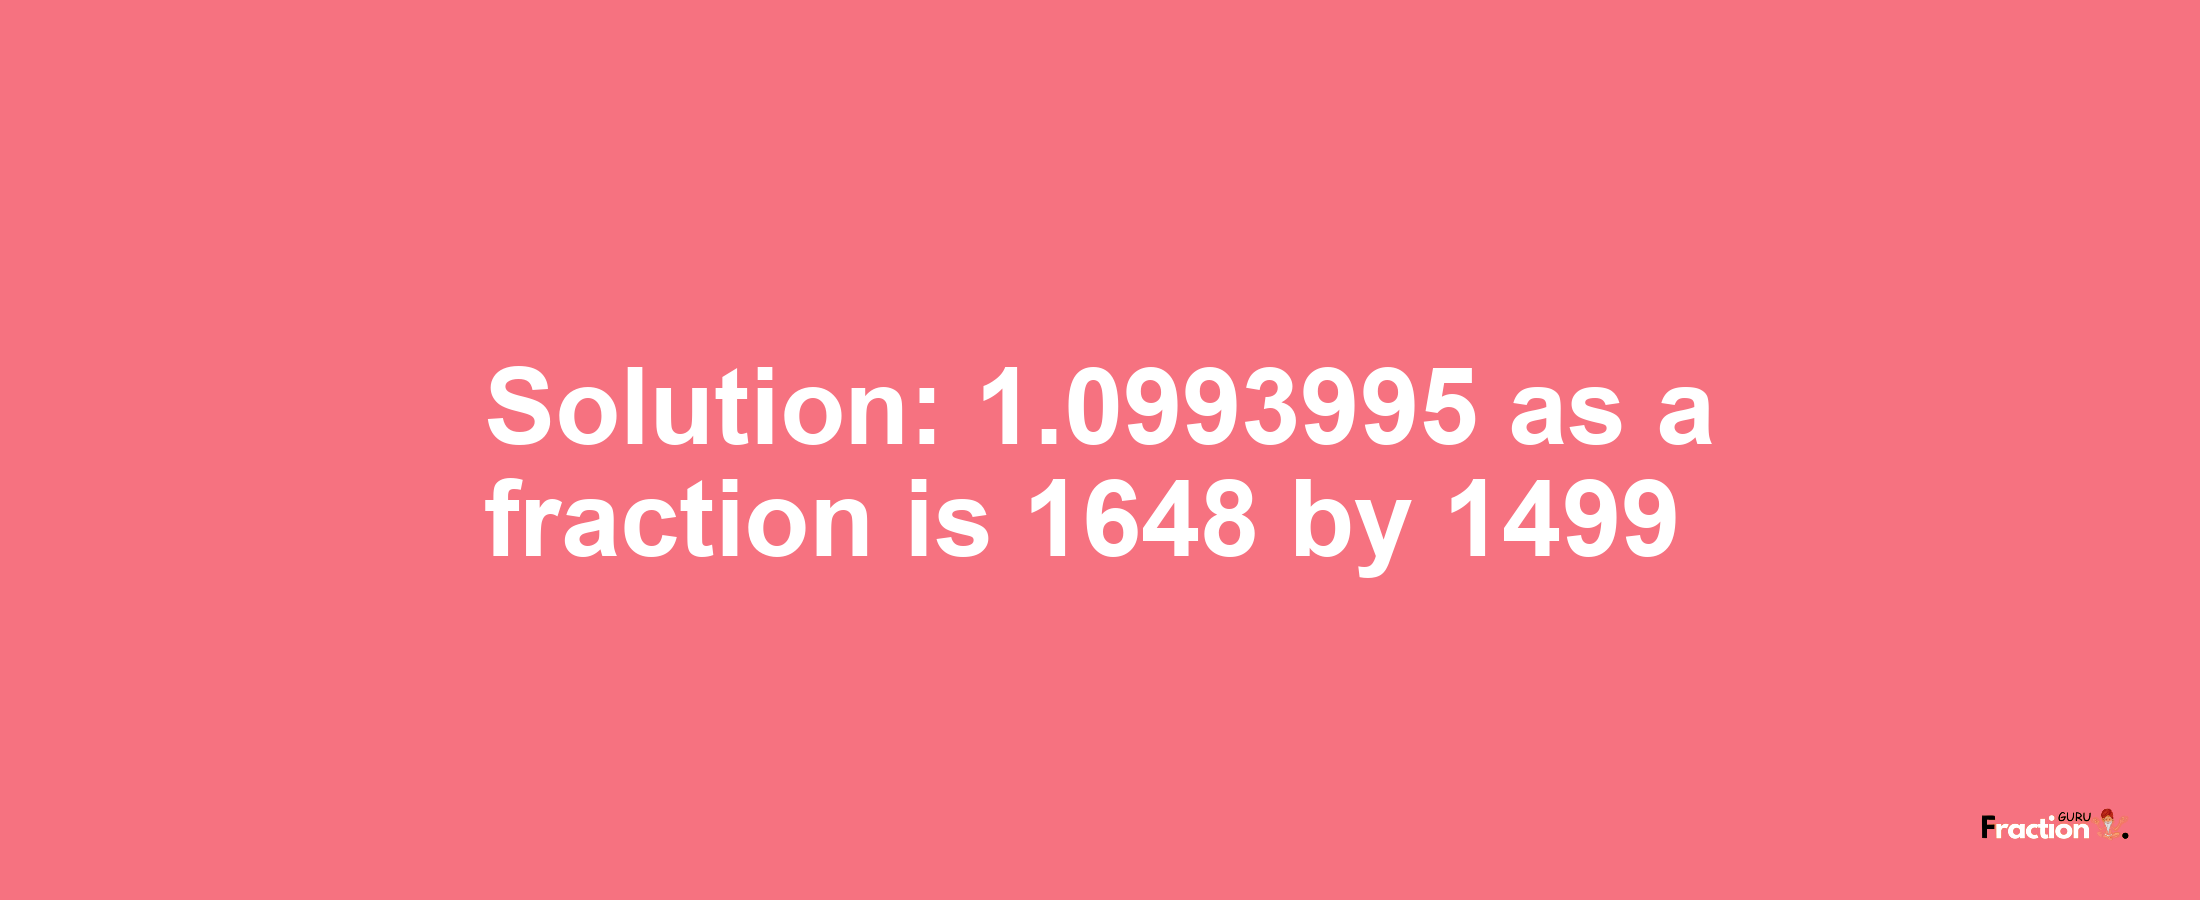 Solution:1.0993995 as a fraction is 1648/1499